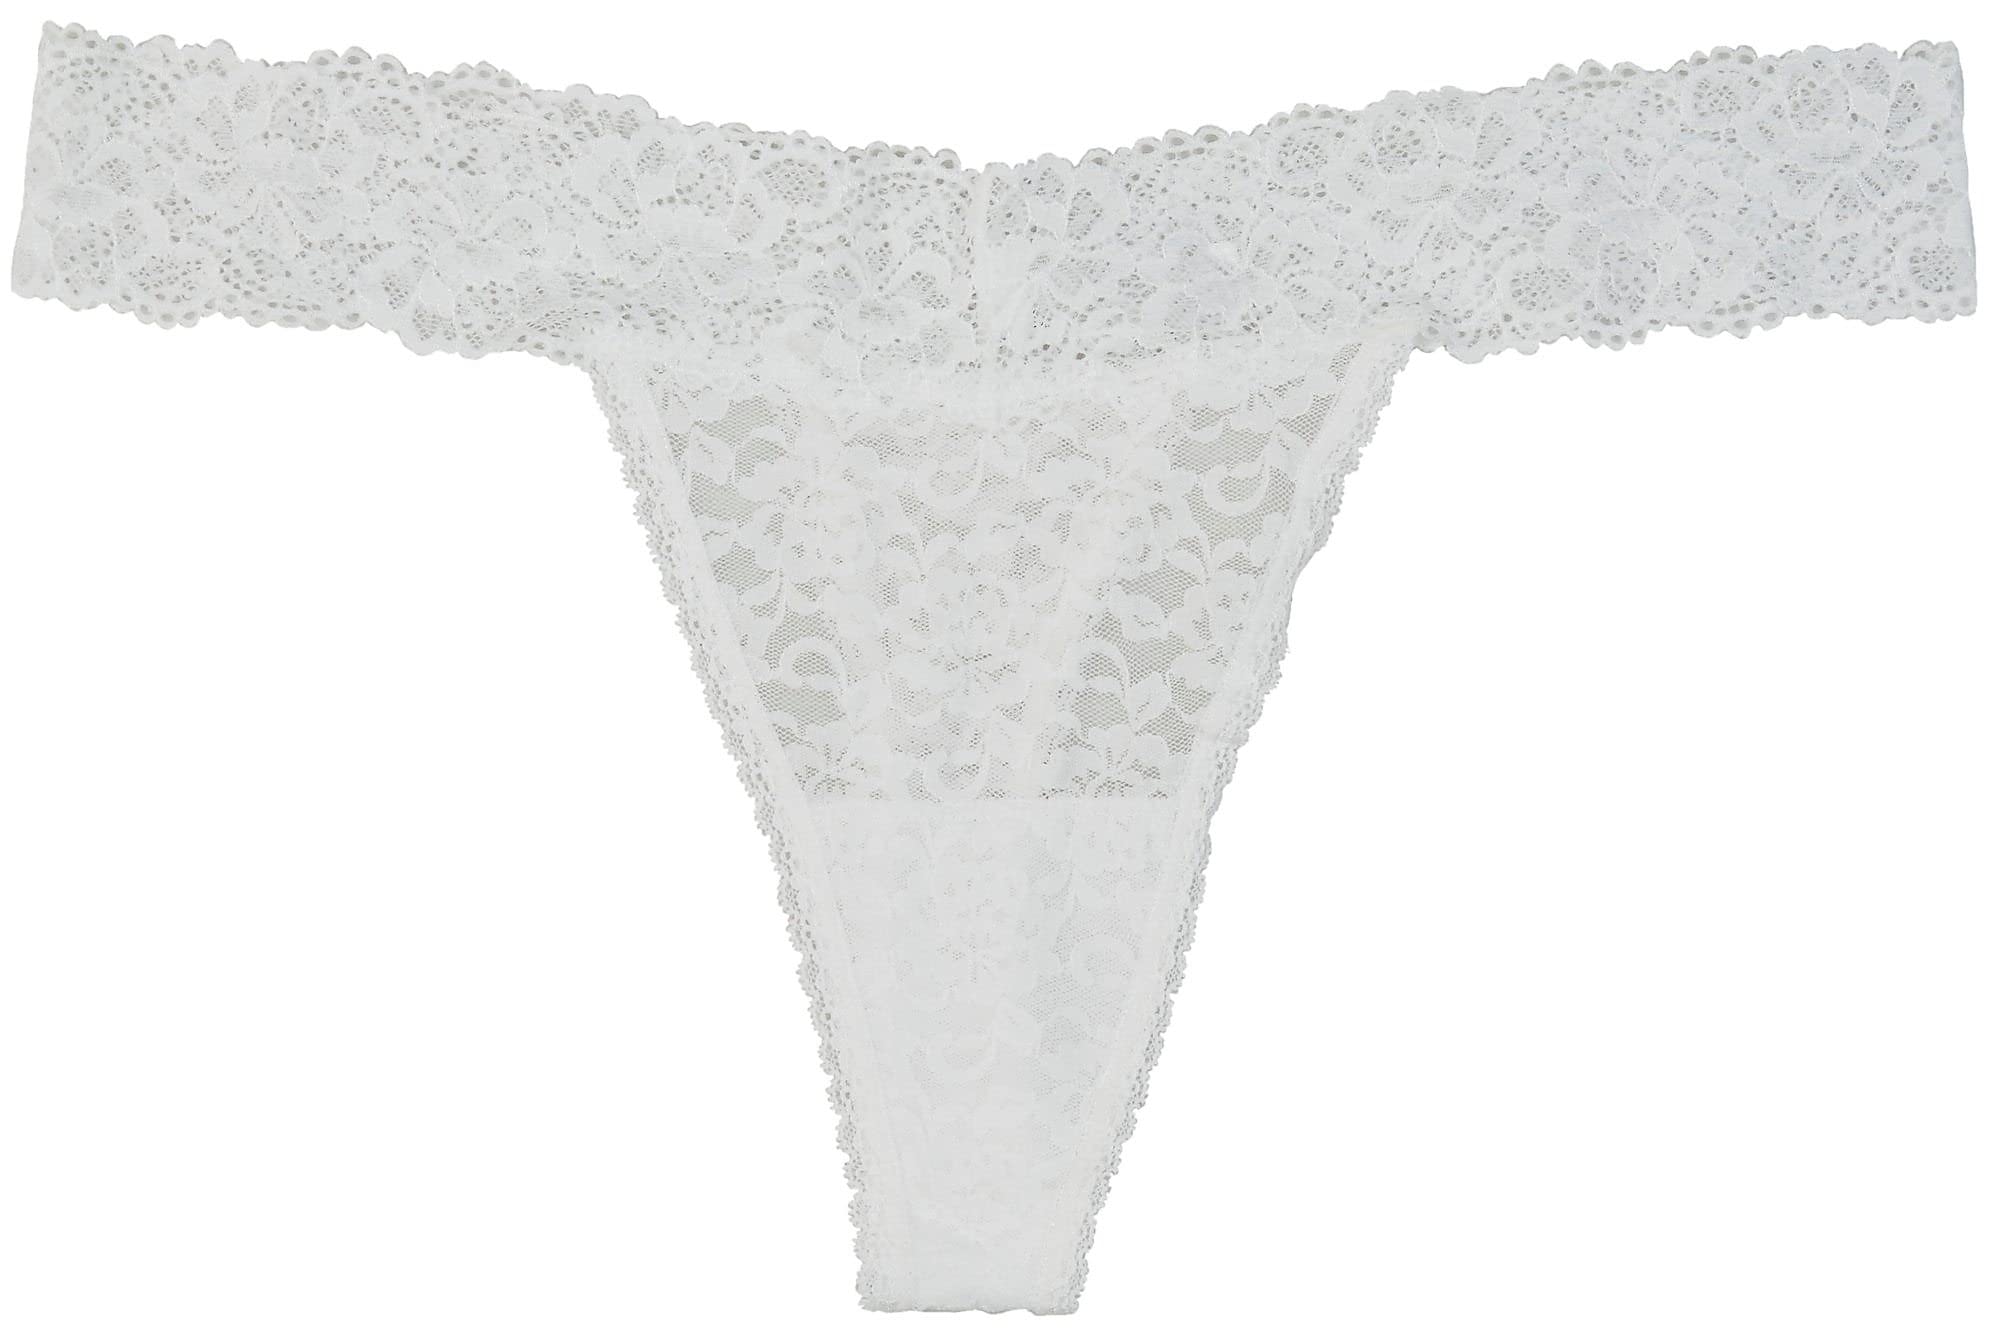 Maidenform womens Underwear Thong, Stretch Lace Thong Panty, Best Thong Panties